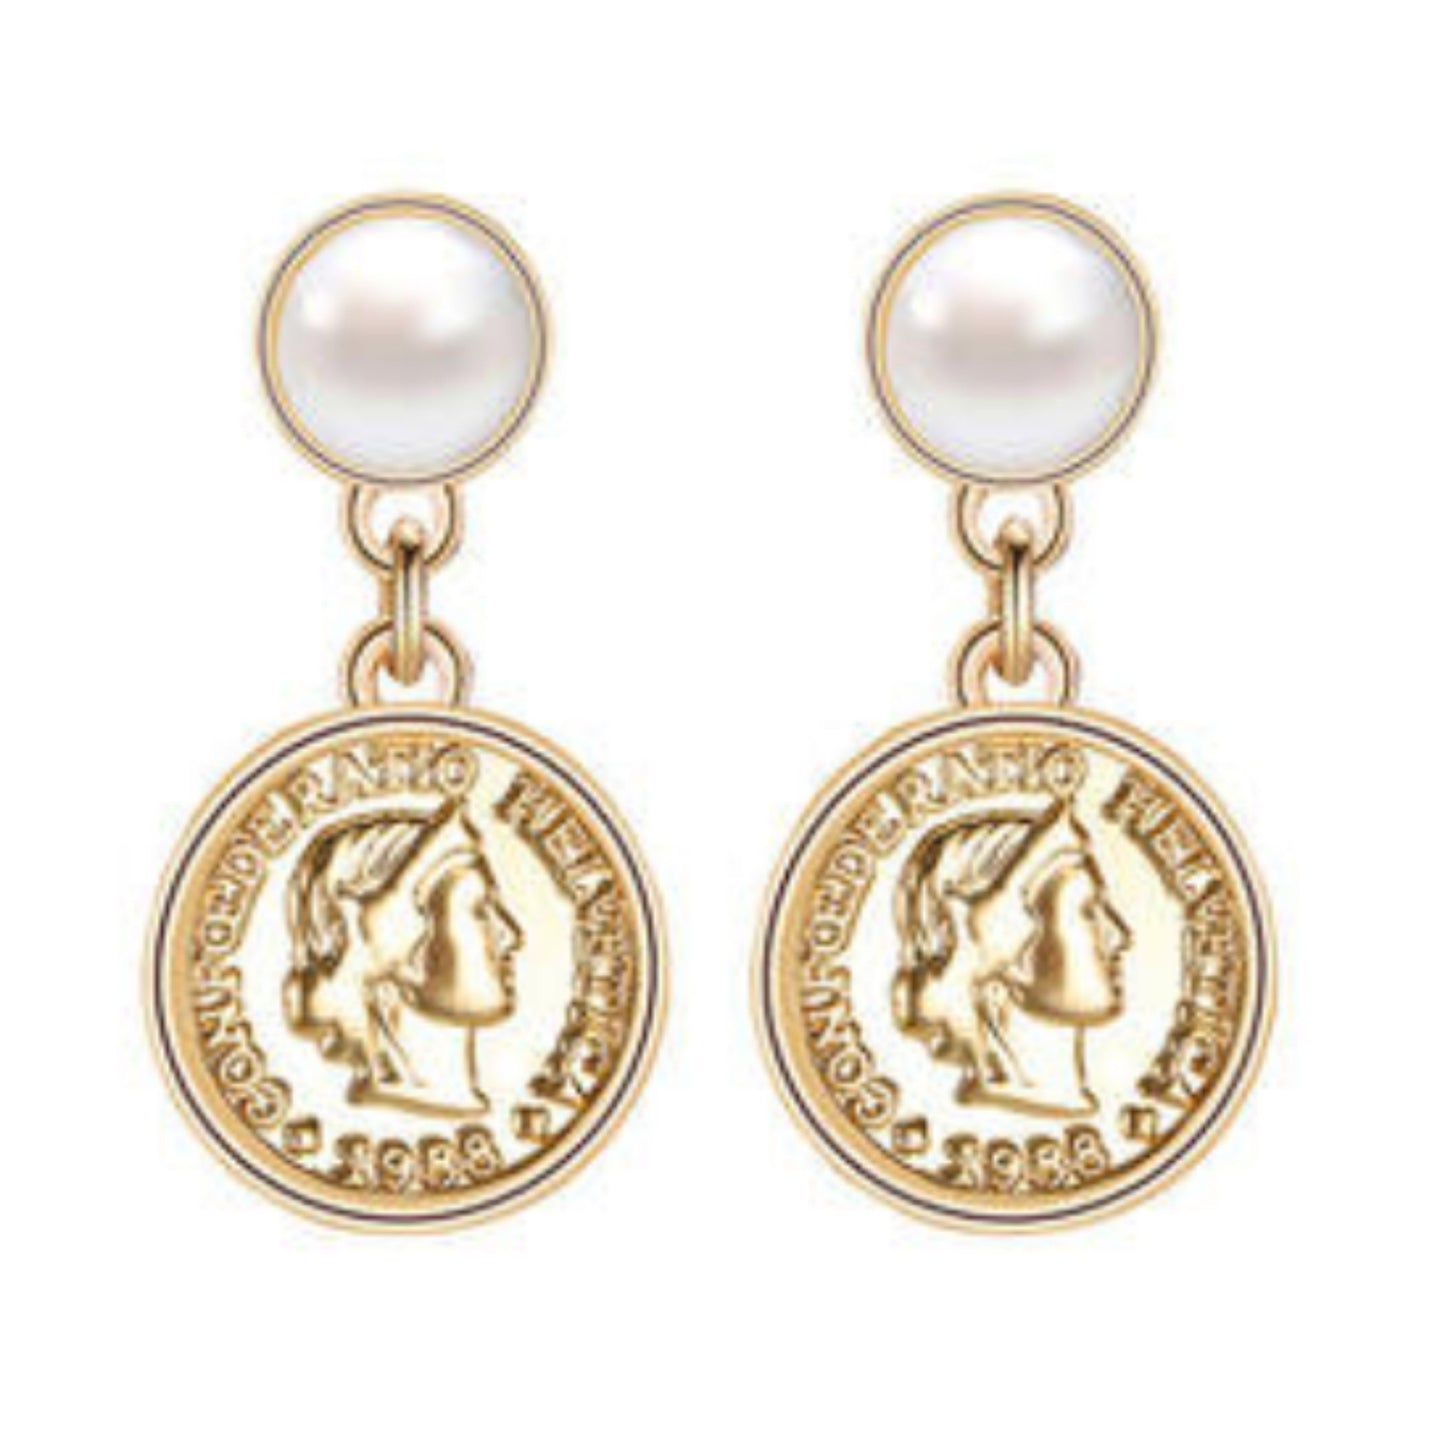 Fabulous 14K Gold Plated Coin & Pearl Earrings